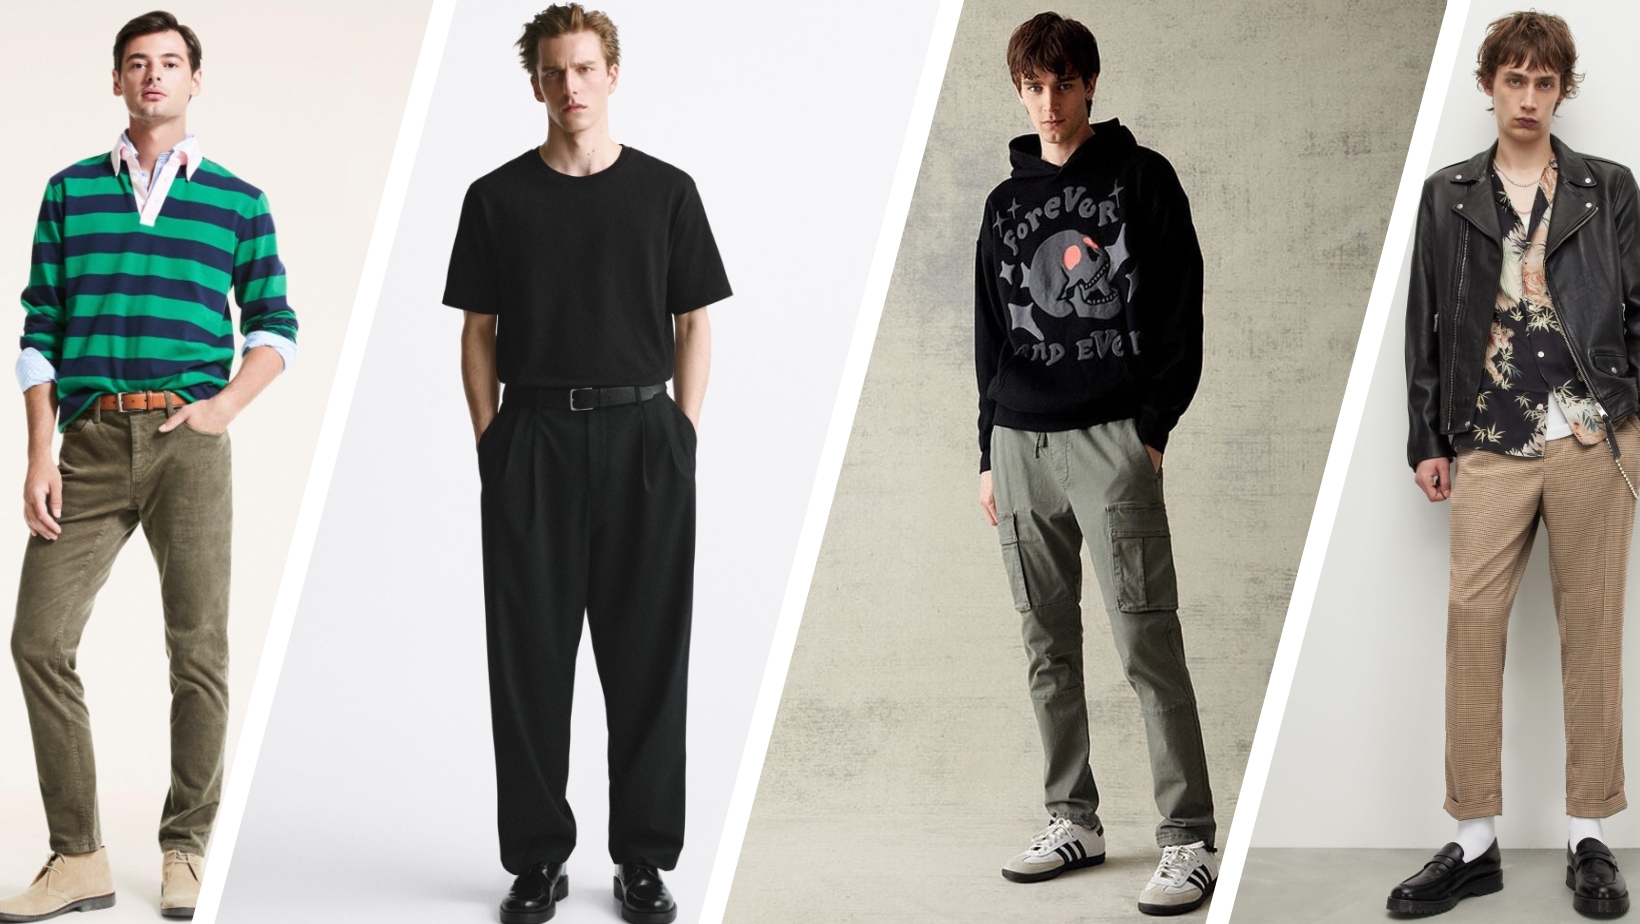 Tailored Casual Pants - Men - Ready-to-Wear